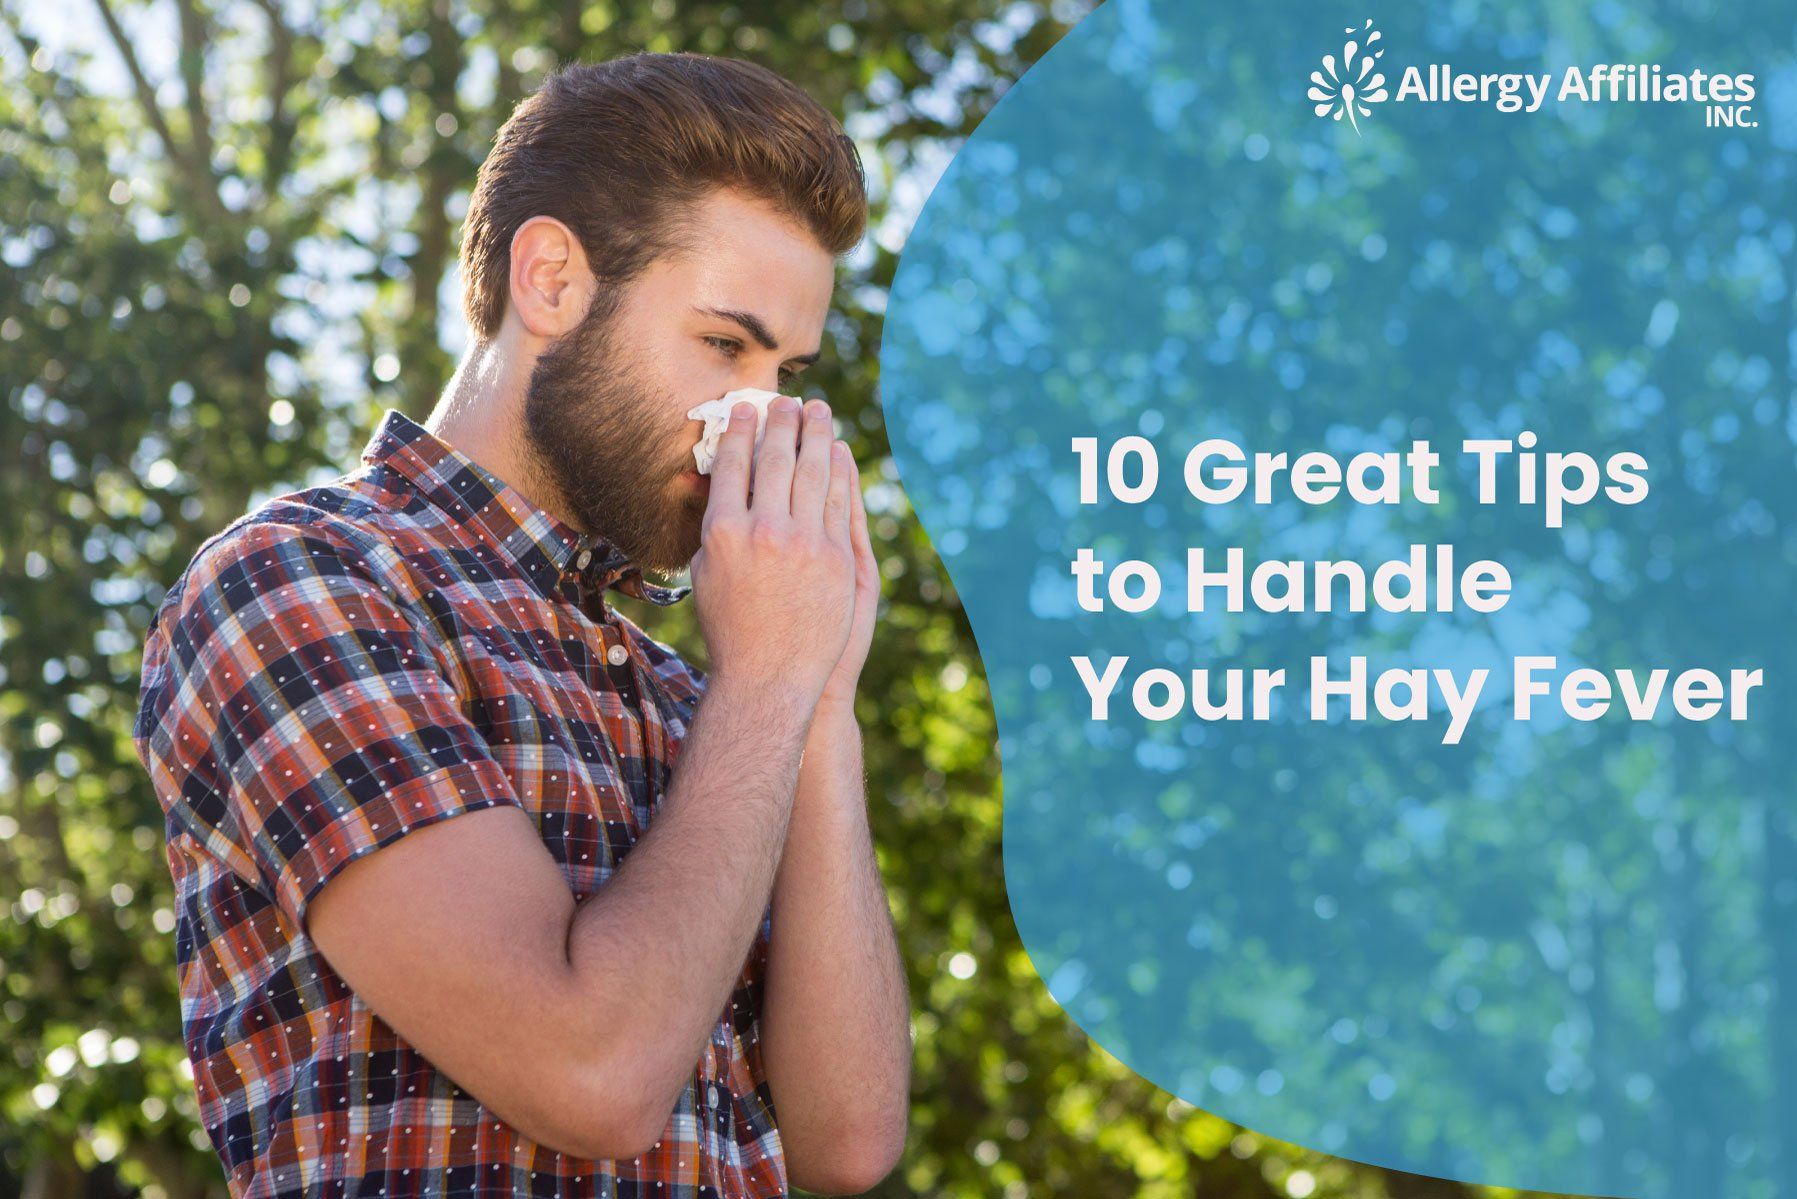 10 Great Tips to Handle Your Hay Fever